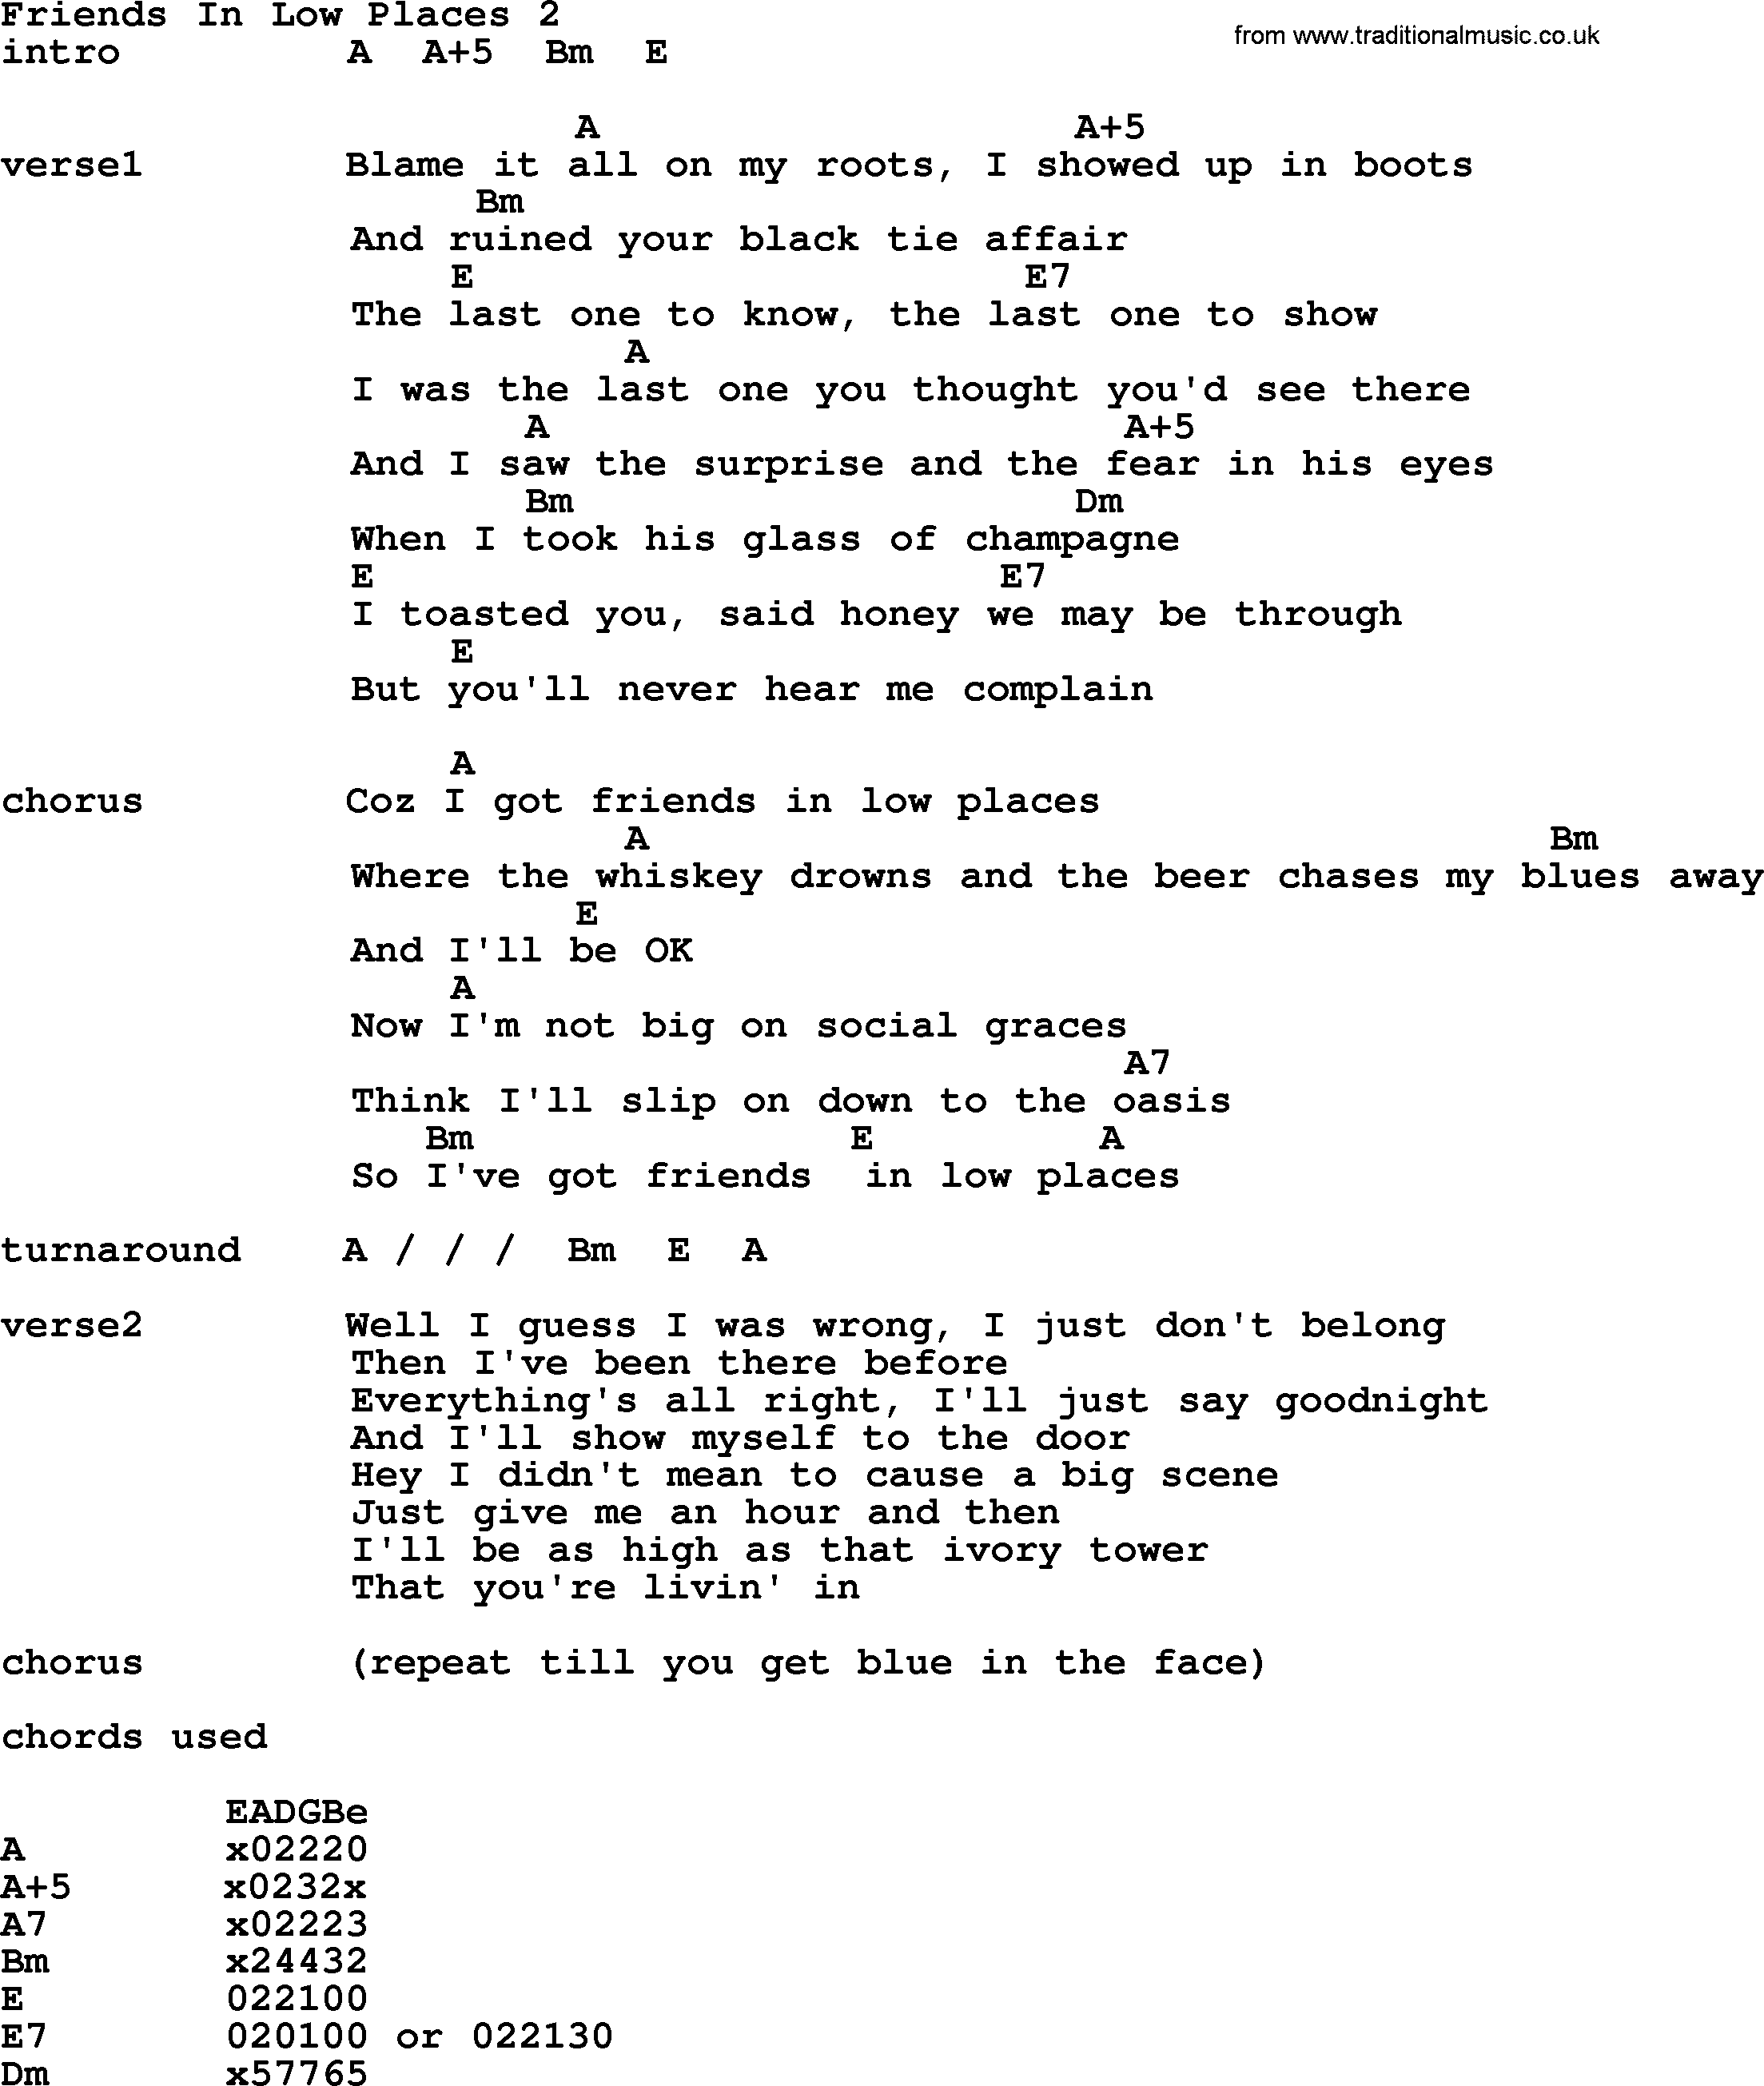 Garth Brooks song: Friends In Low Places 2, lyrics and chords